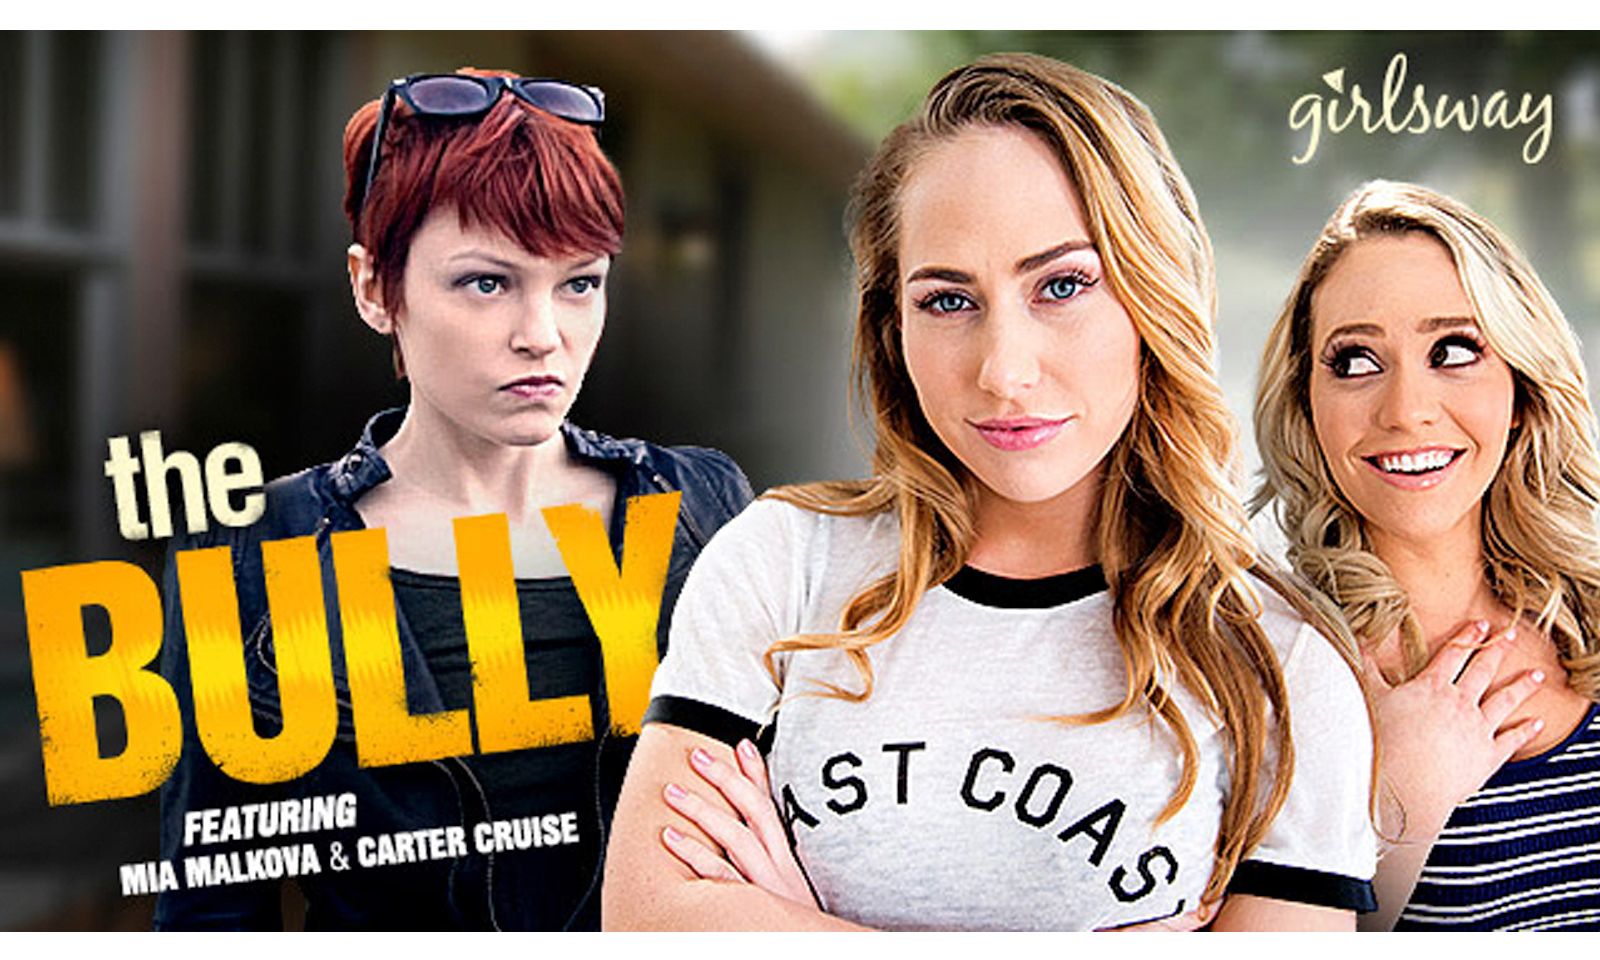 Girlsway Network Makes Fan's Fantasy Reality With ‘The Bully’